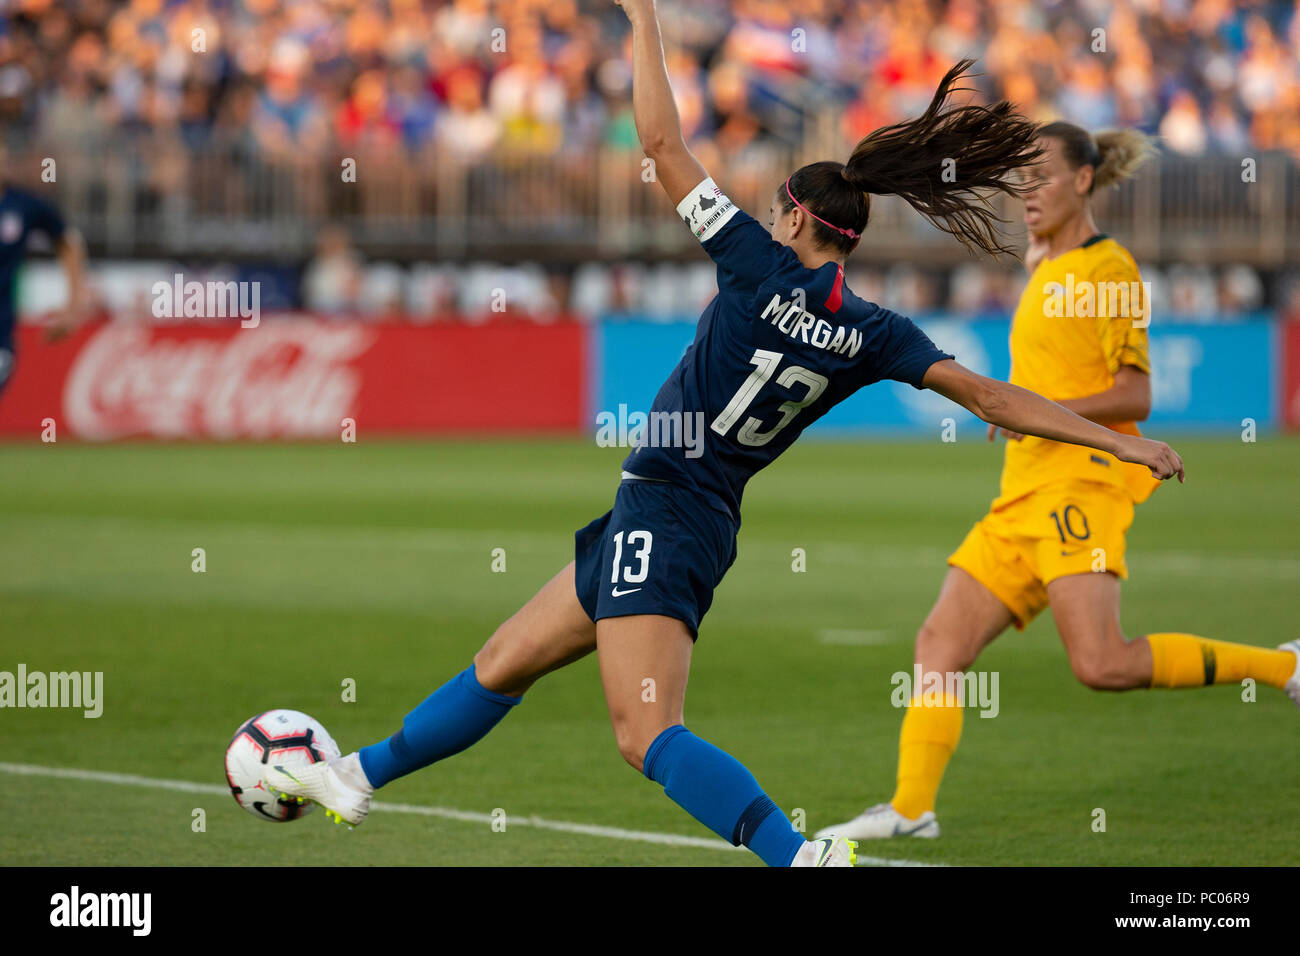 East Hartford, United States. 29th July, 2018. Alex Morgan (13) of USA kicks ball during Tournament of Nations game against Australia at Pratt & Whitney stadium Game ended in draw 1 - 1 Credit: Lev Radin/Pacific Press/Alamy Live News Stock Photo